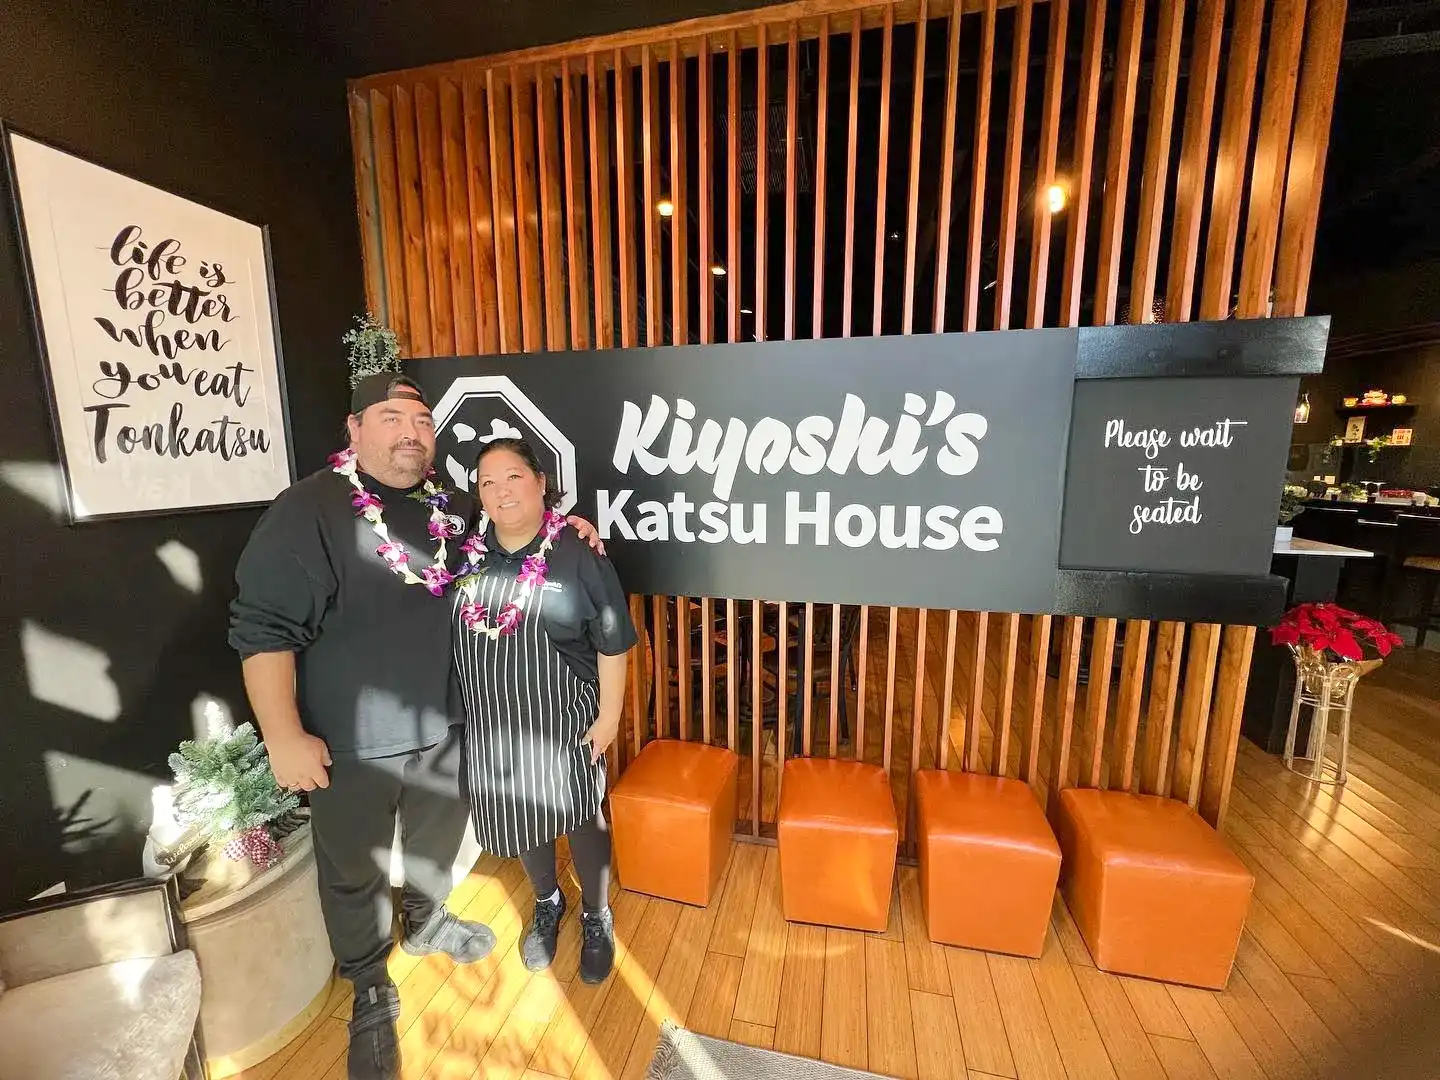 Mark and Beth, the owners of Kiyoshi's Katsu House, standing together in the entrance of their restaurant, smiling and welcoming guests